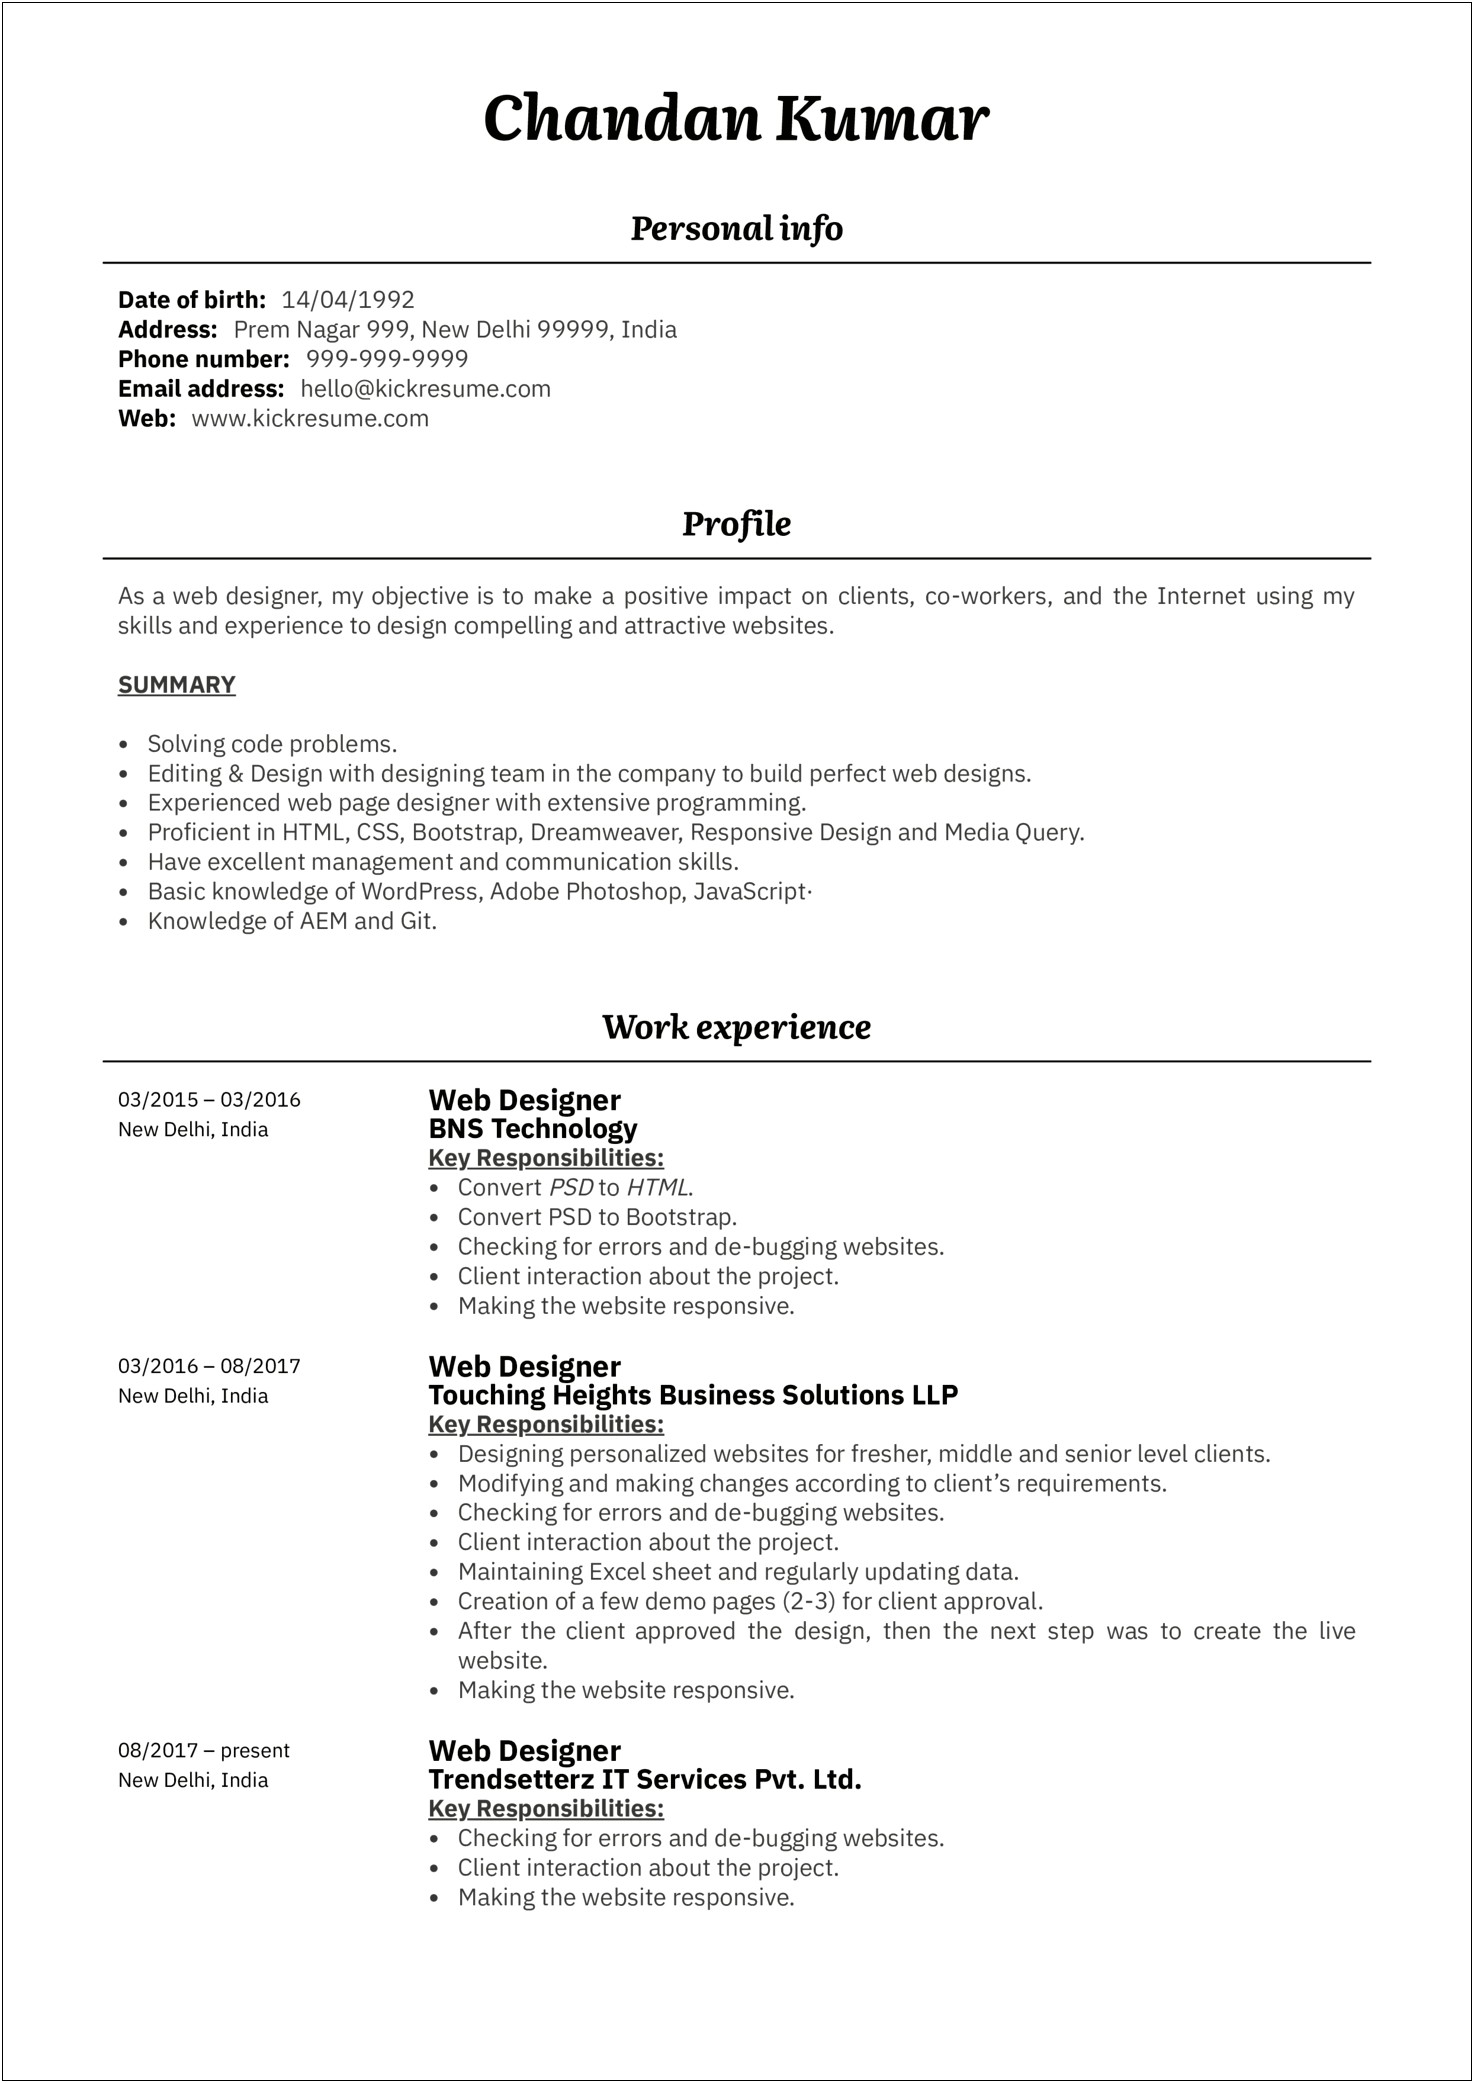 A Good Profile Statement For A Resume